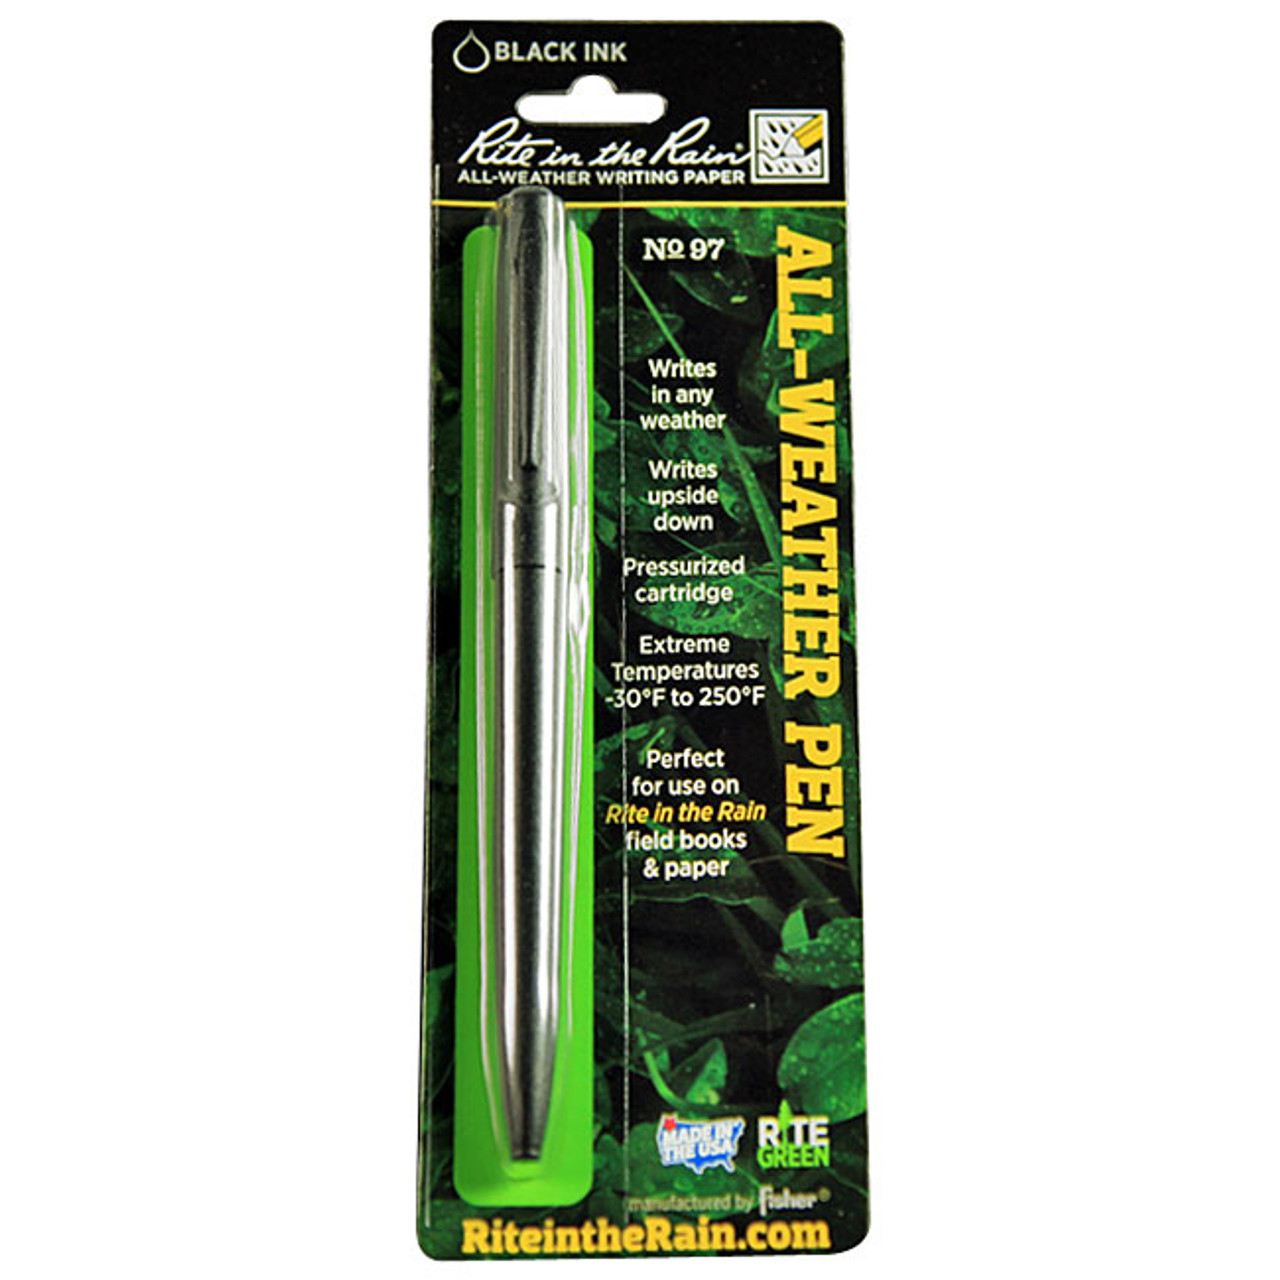 Rite in The Rain All-Weather Tactical Black Clicker Pen No. 97 - Black Ink  - CERT Kits Supplies